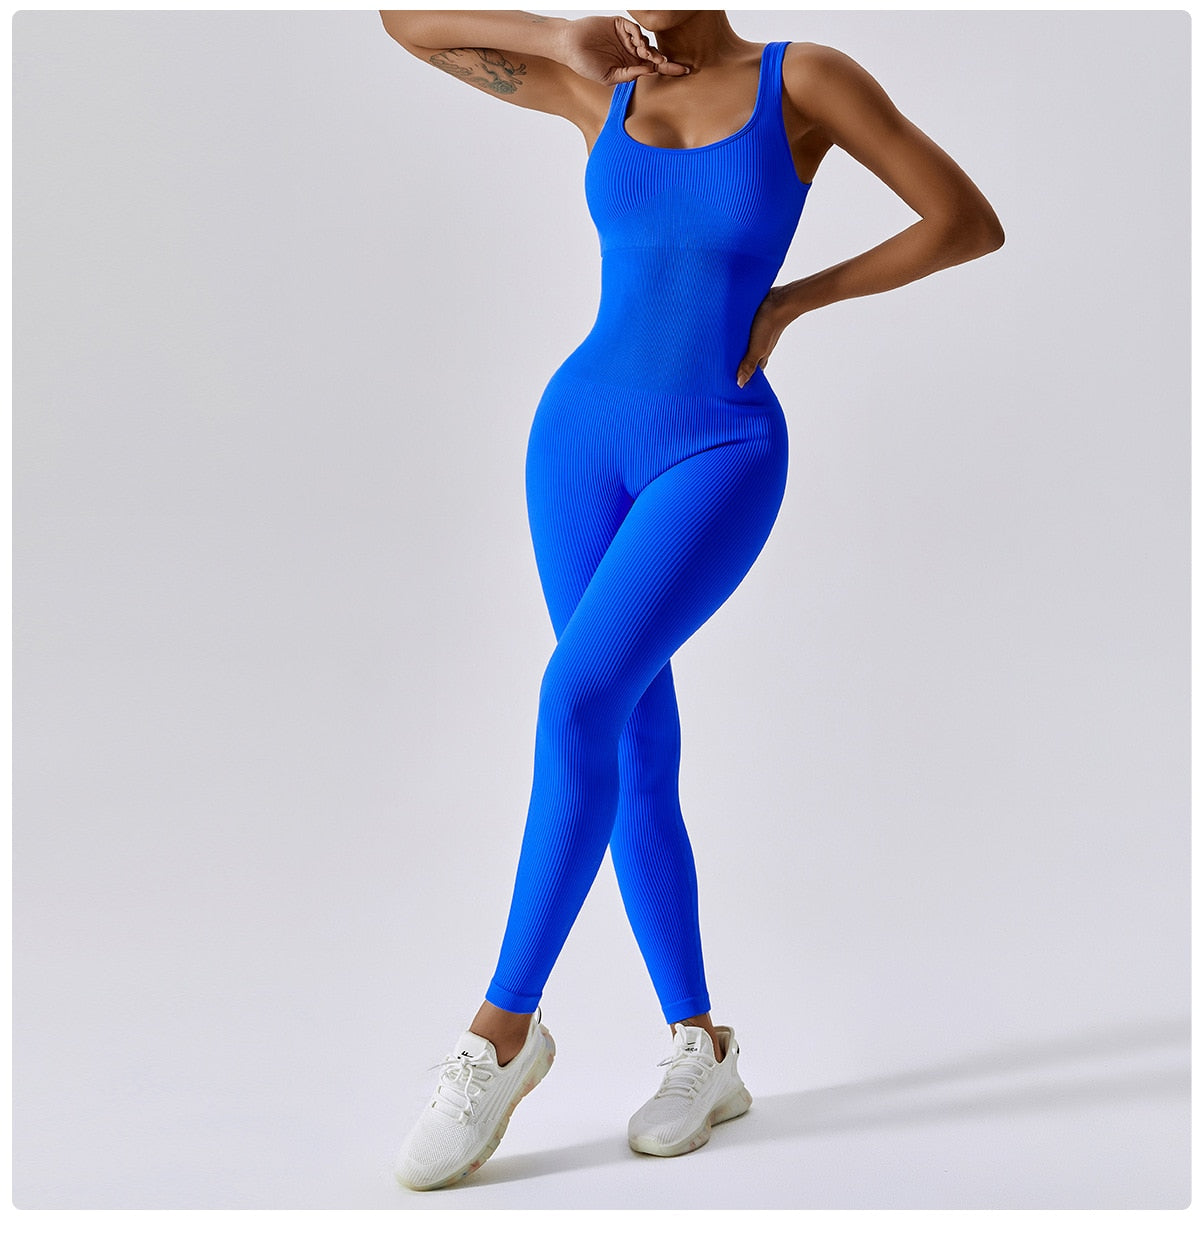 Spring Seamless One-Piece Yoga Clothes Sportswear Women's Gym Push Up Workout Clothes Fitness Sports Stretch Bodysuit Yoga Suit The Clothing Company Sydney